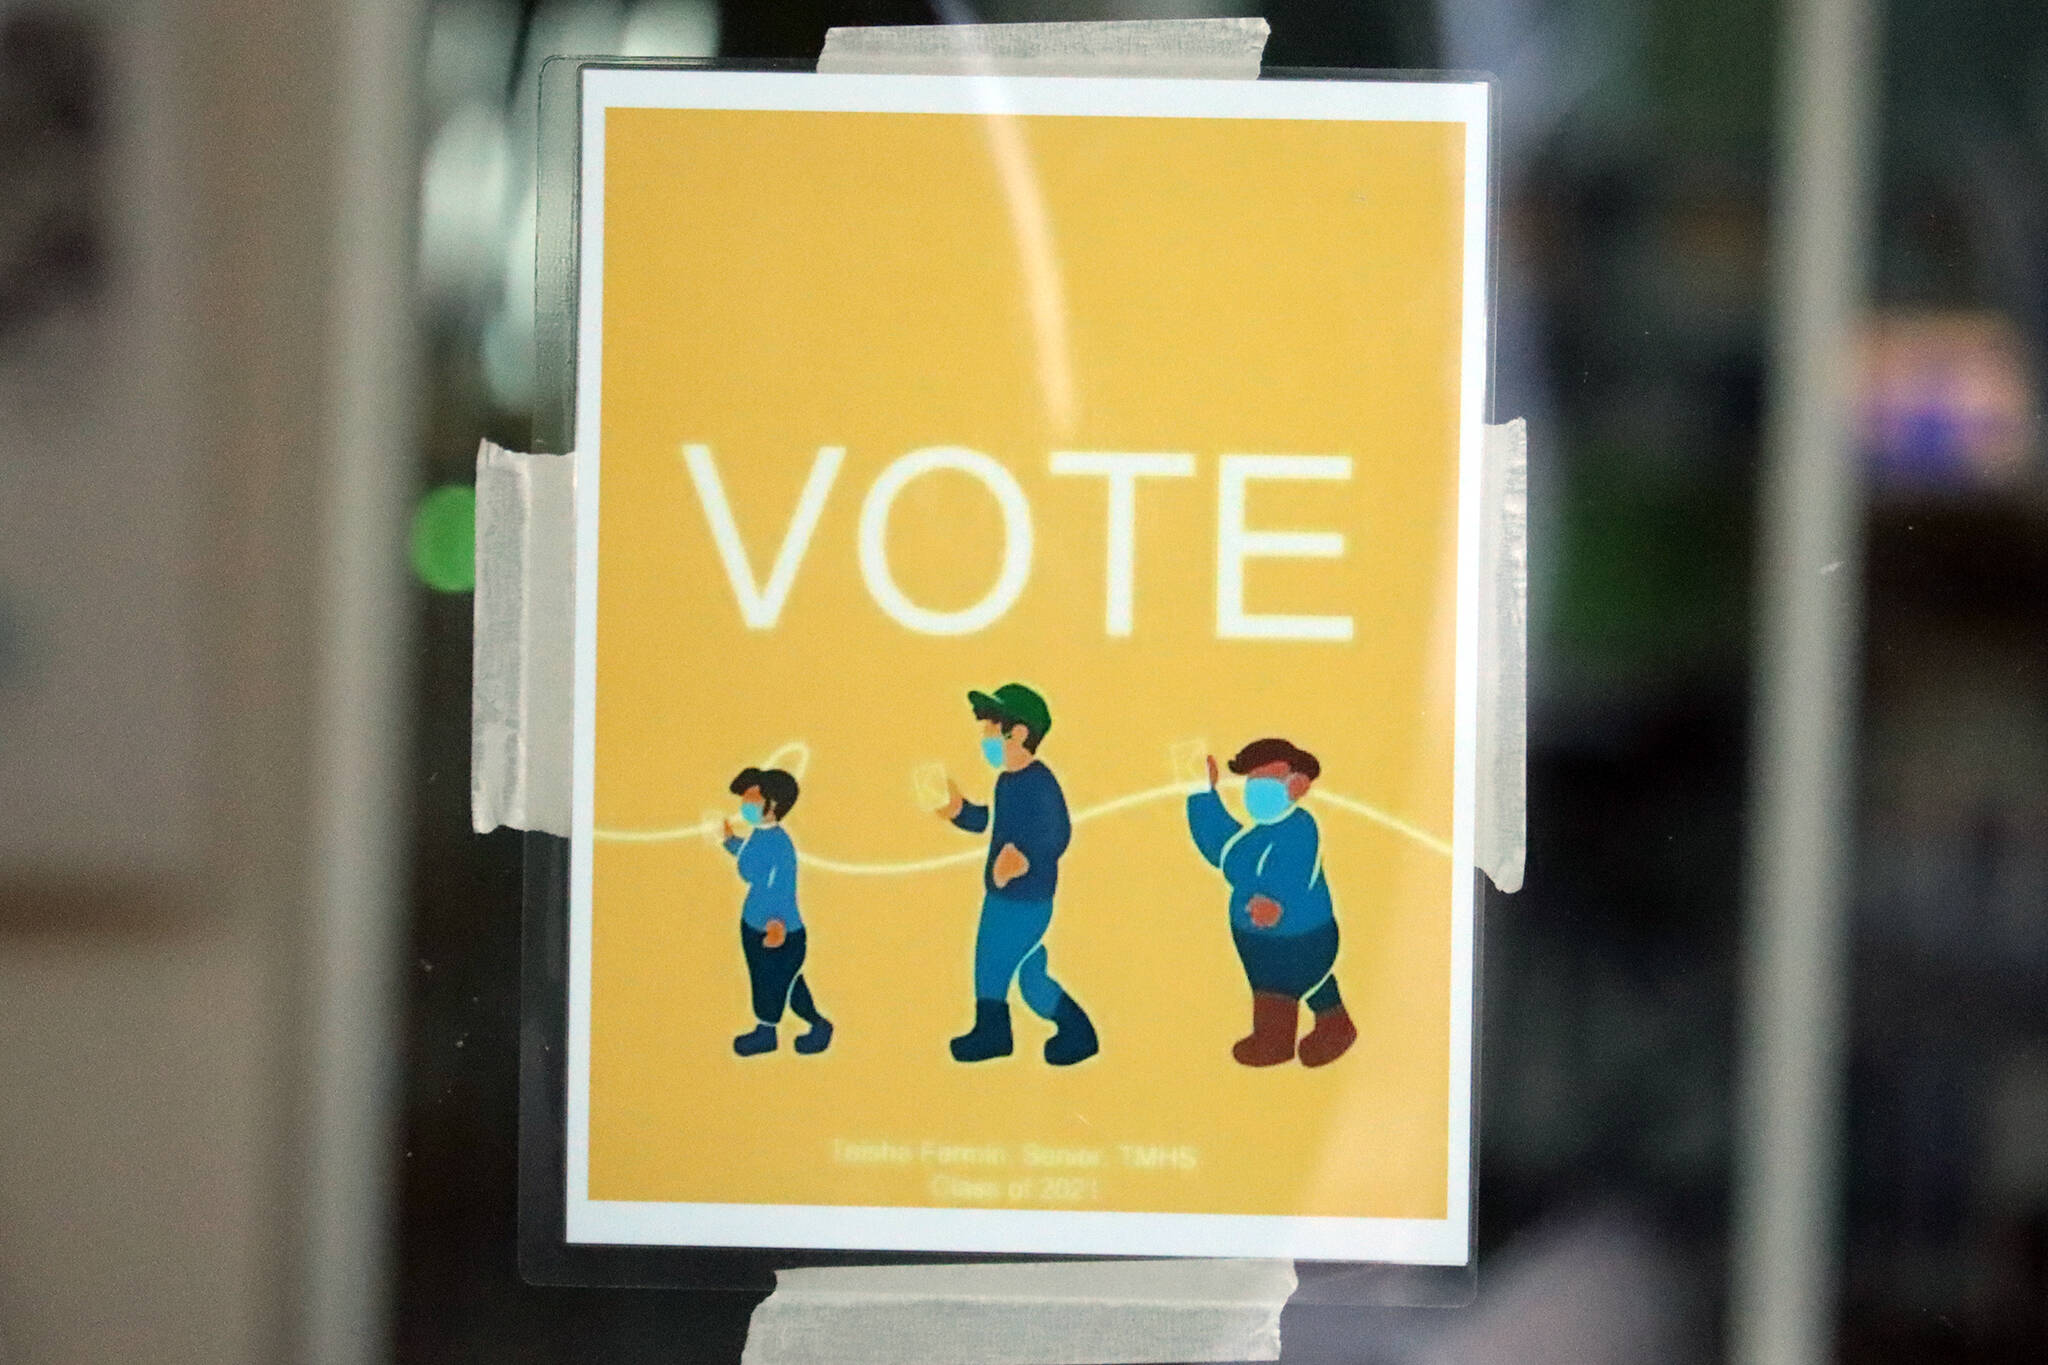 A sign designates a vote center during the recent municipal election. The center offered a spot for voters to drop off ballots or fill a ballot out in person. (Ben Hohenstatt / Juneau Empire)